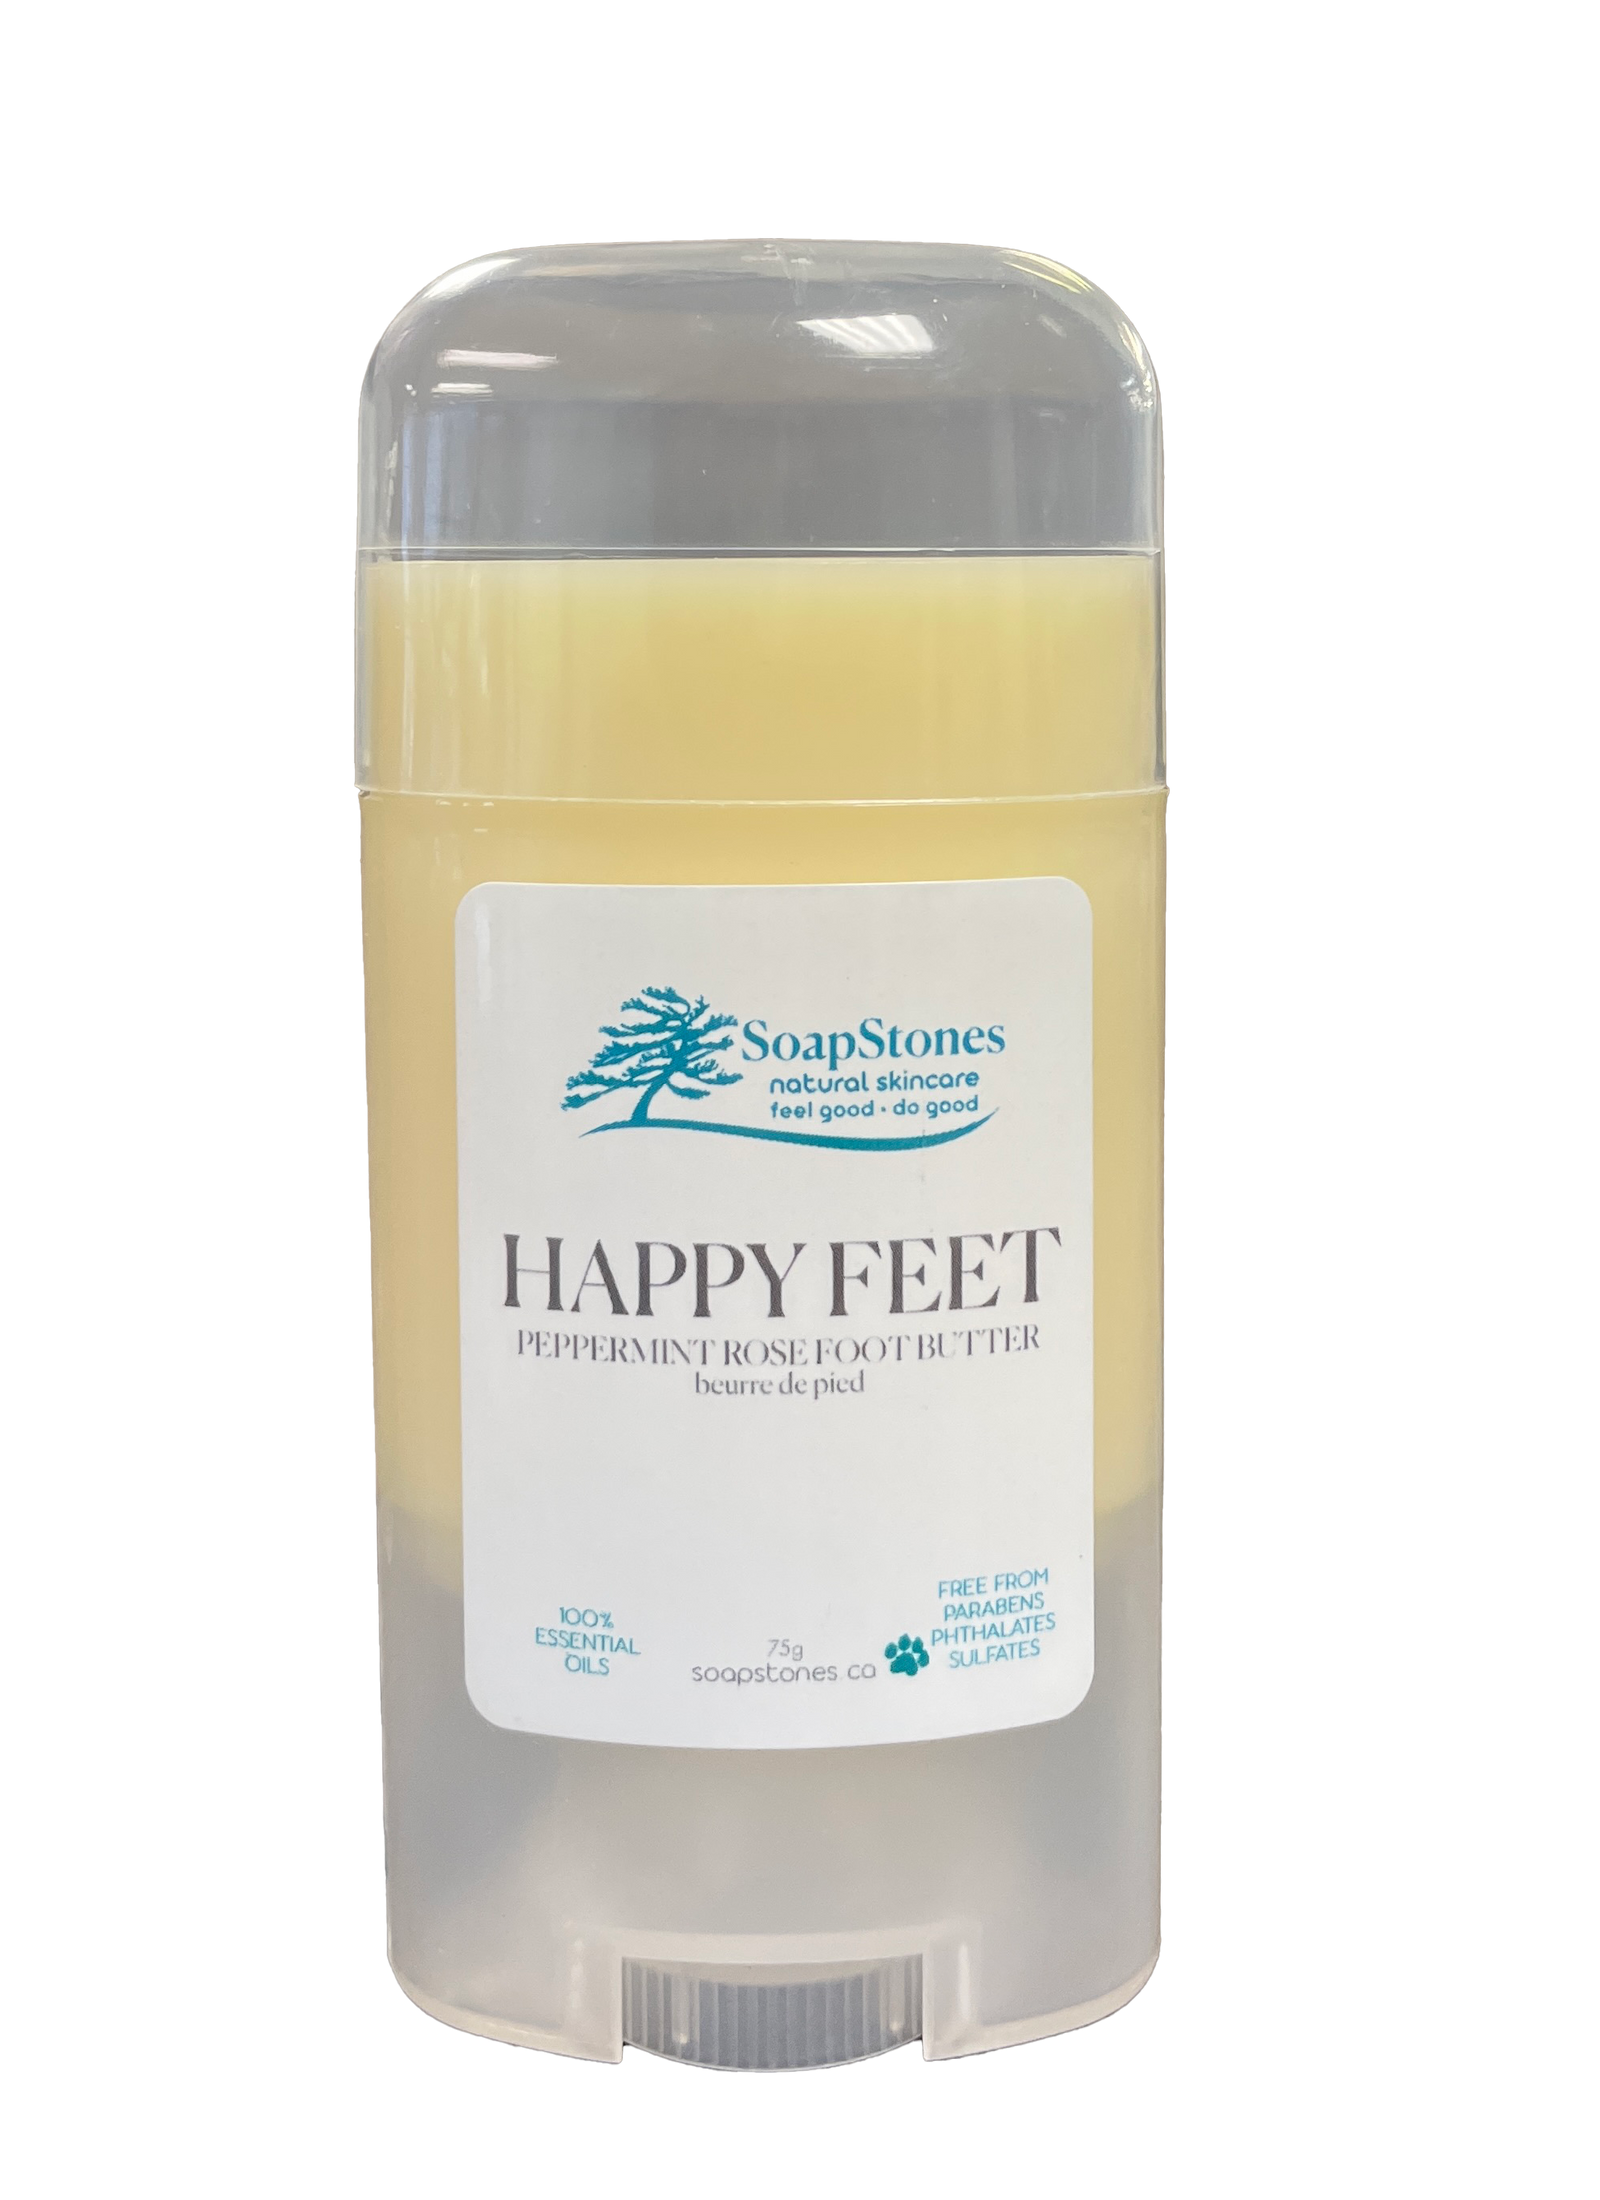 Happy Feet Peppermint Rose Foot Butter - Soapstones Natural Skincare